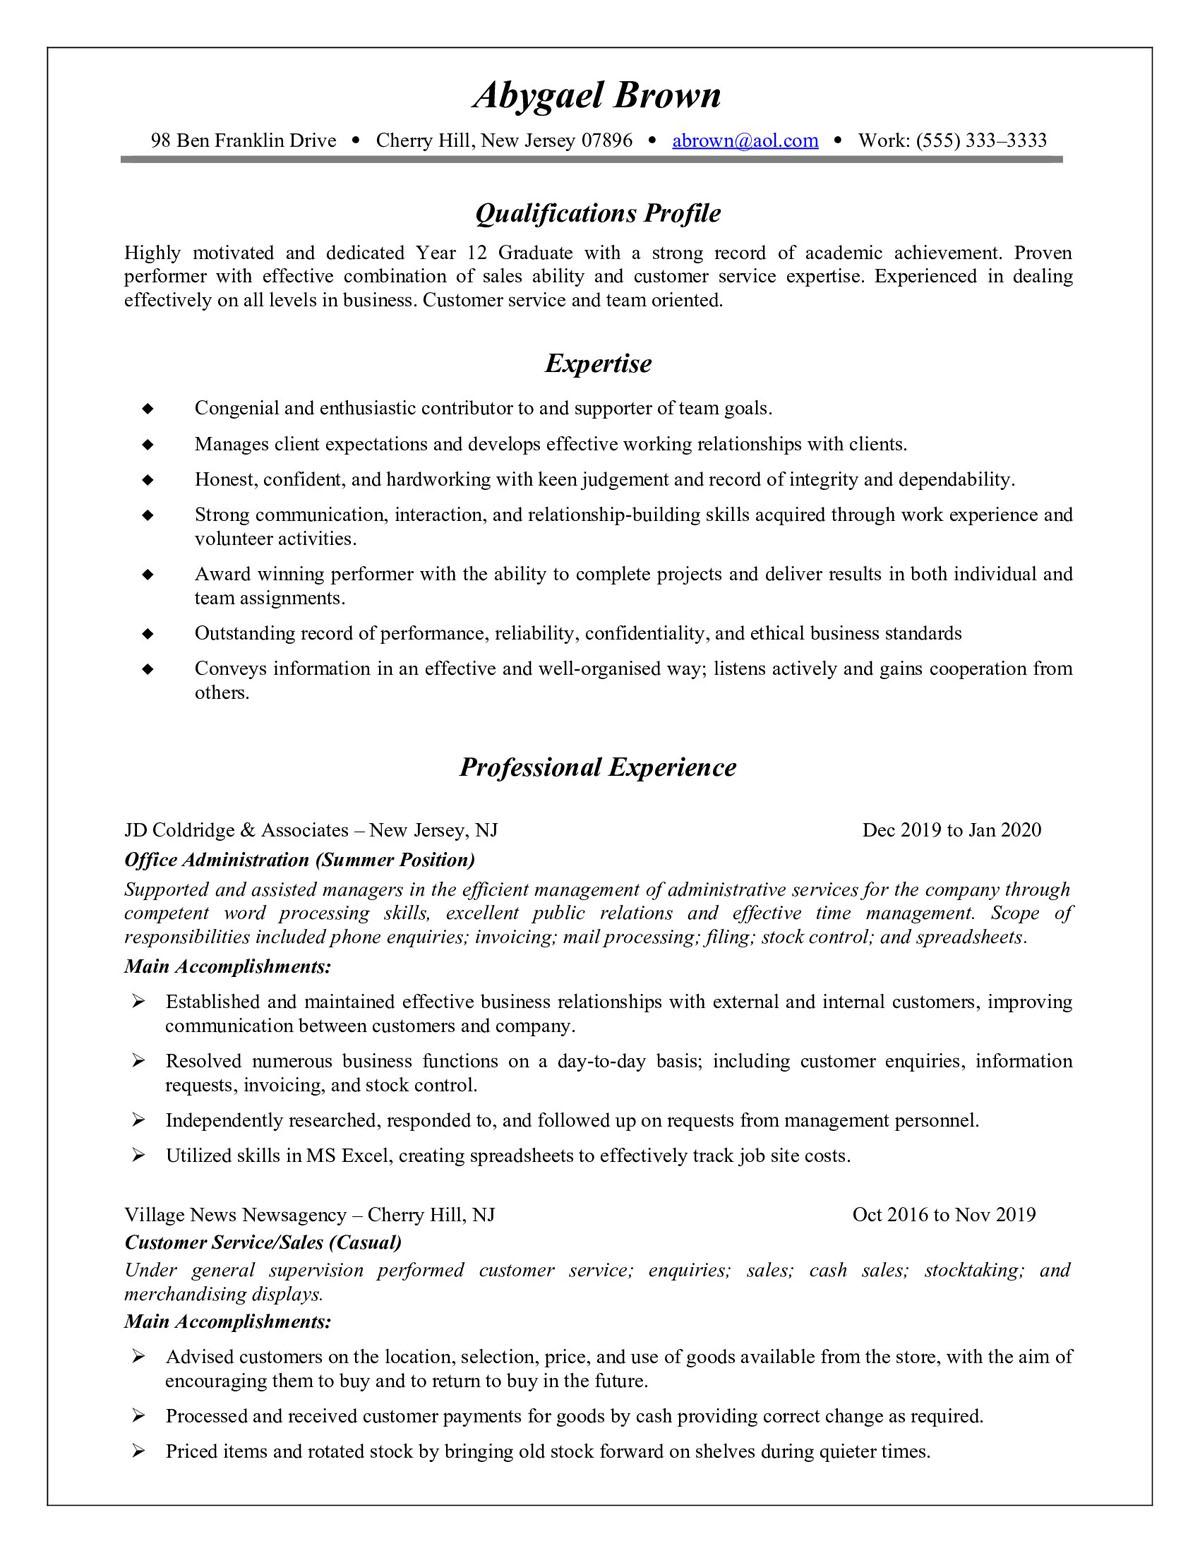 Sample resume: Sales, Entry Level, Combination